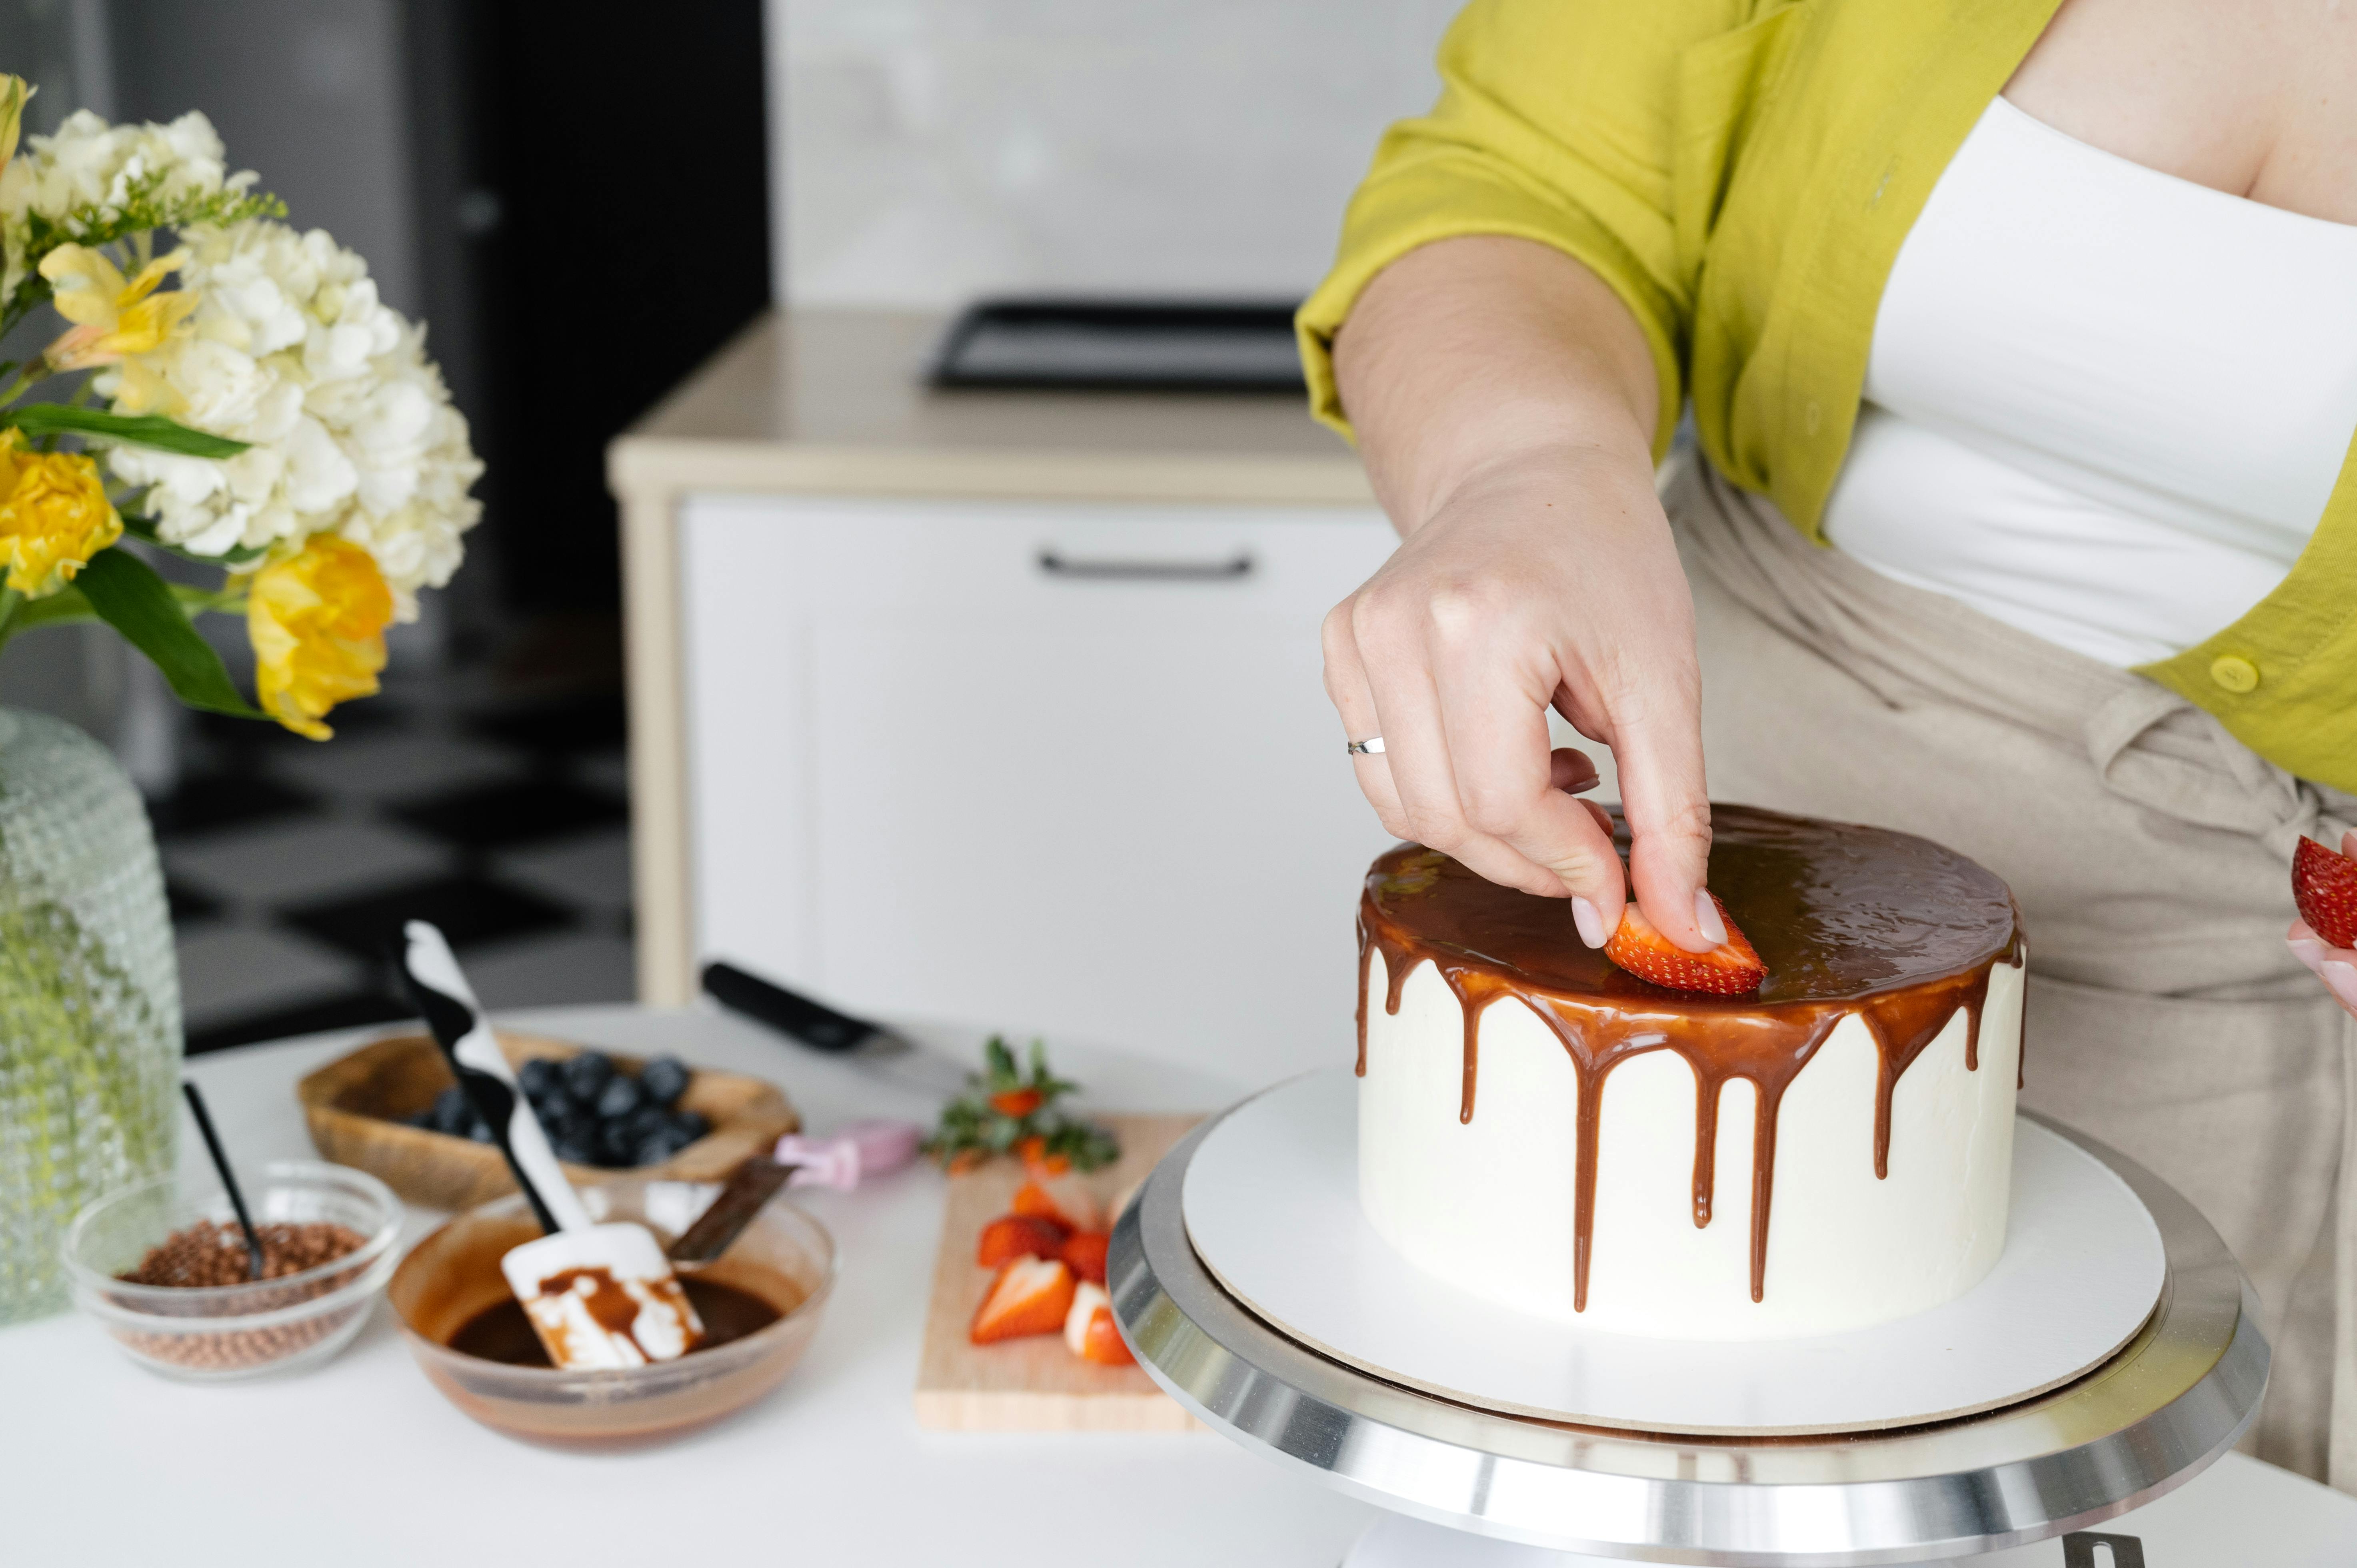 Soon, we were decorating the cake | Source: Pexels